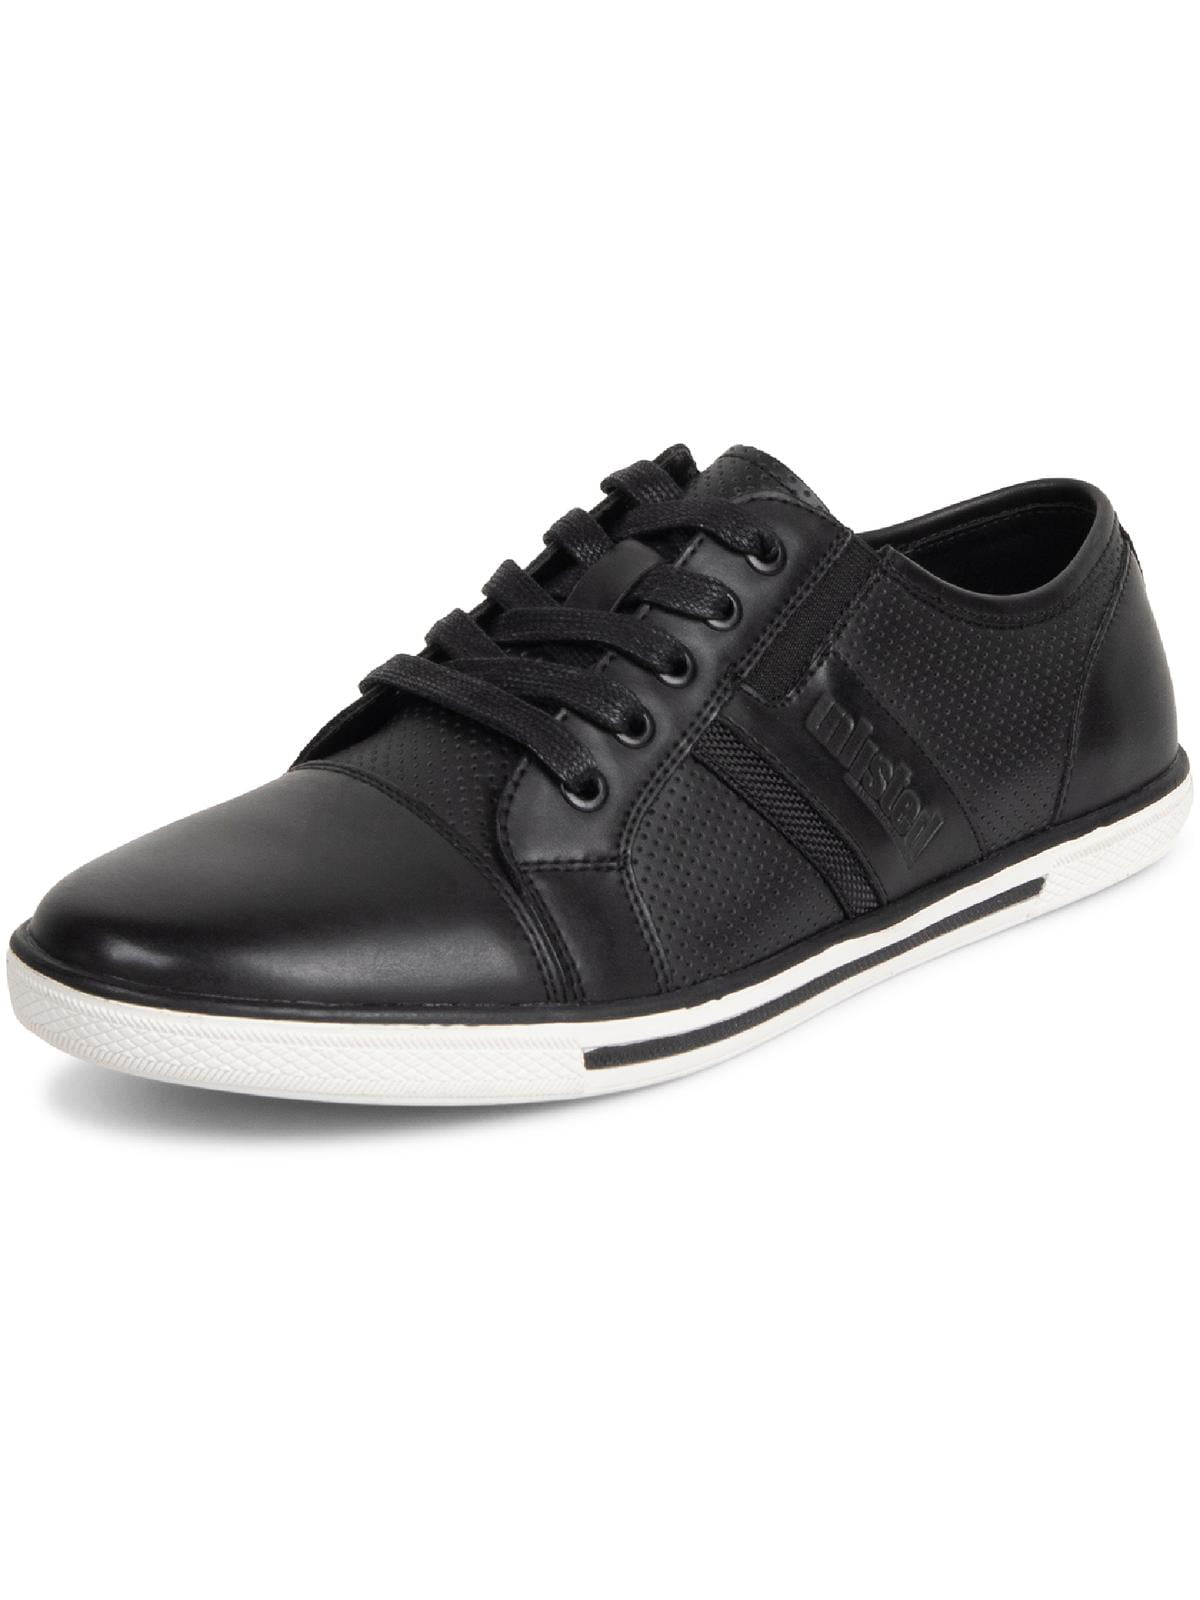 Kenneth Cole Men's Unlisted Shiny Leather Sneakers - Walmart.com